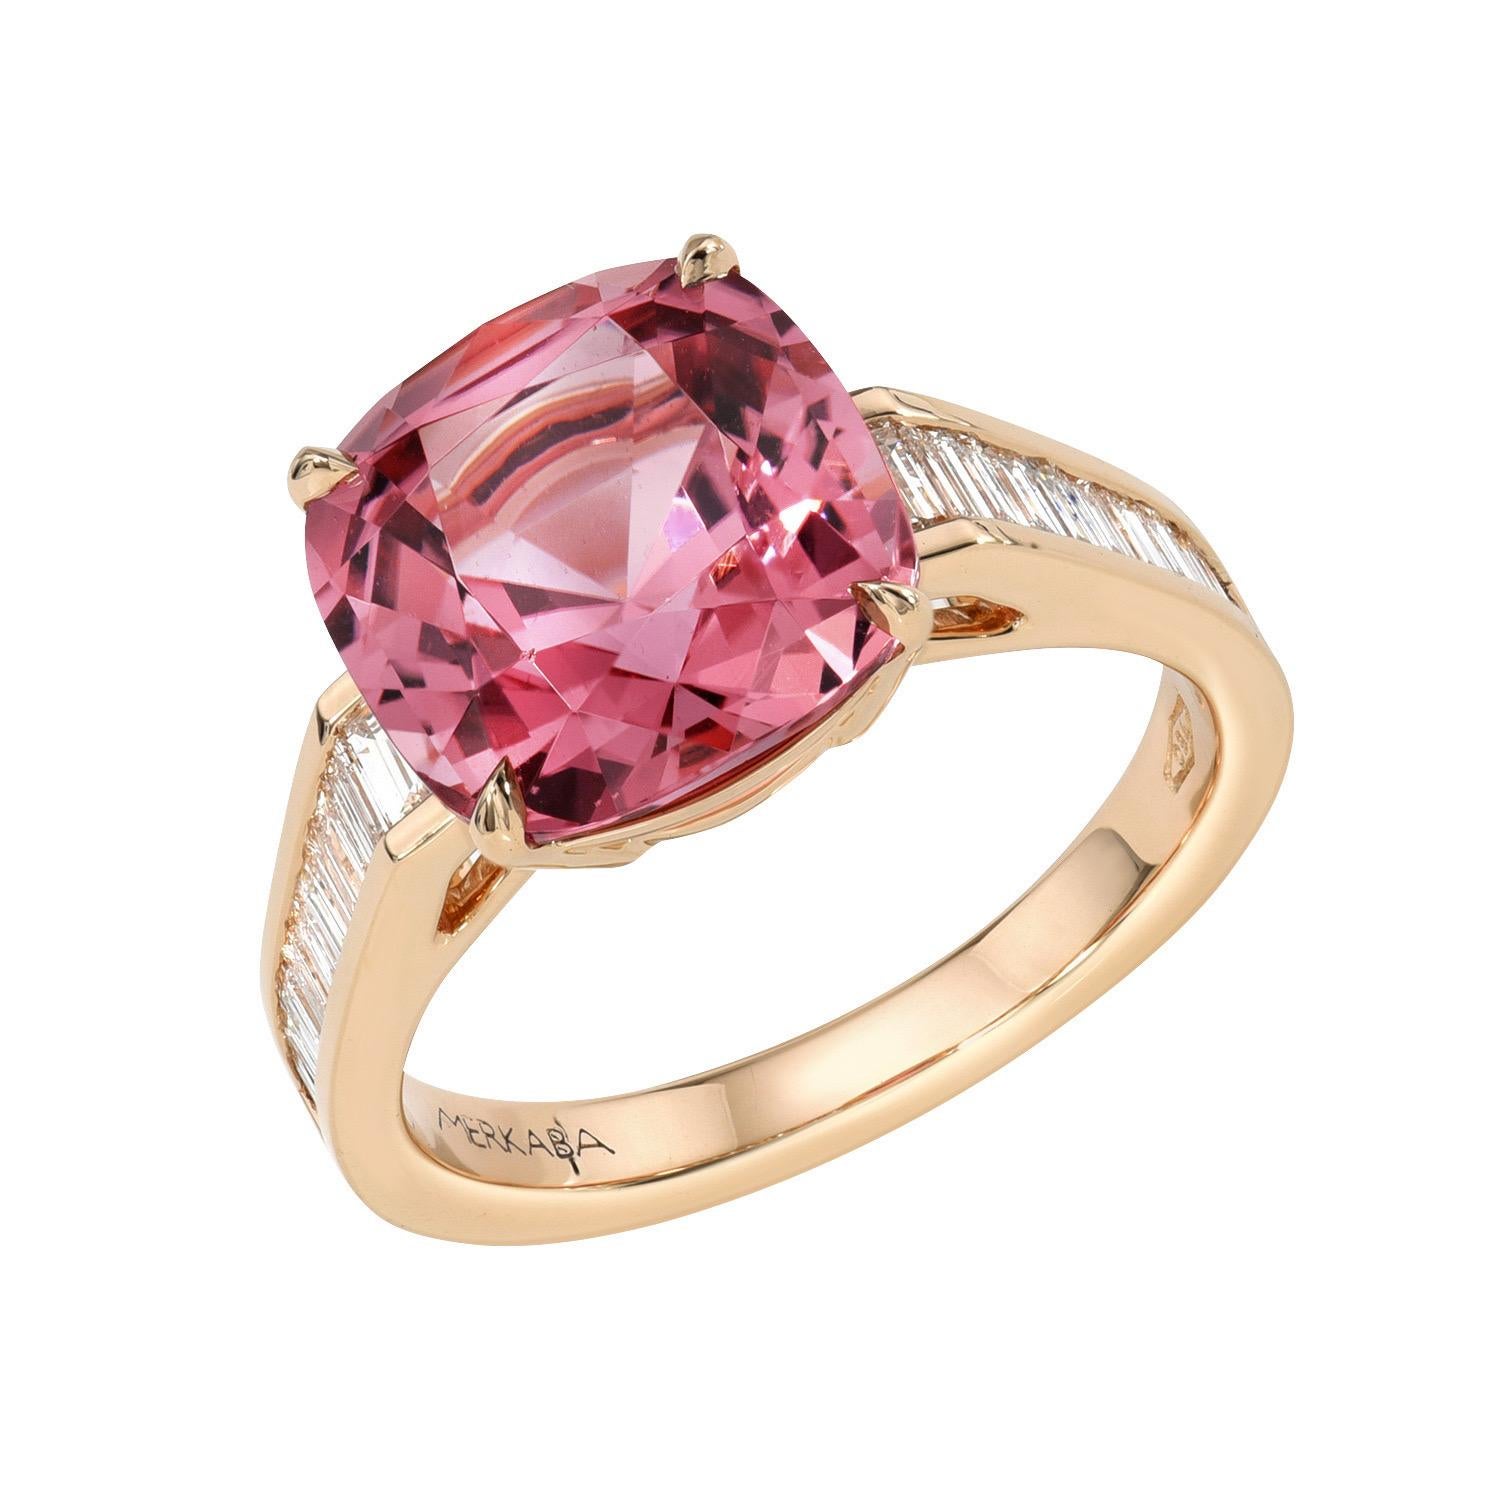 Remarkable 5.25 carat Pink Tourmaline cushion, 18K rose gold ring, decorated with a total of 0.56 carat collection baguette diamonds.
Ring size 6.5. Resizing is complementary upon request.
Returns are accepted and paid by us within 7 days of